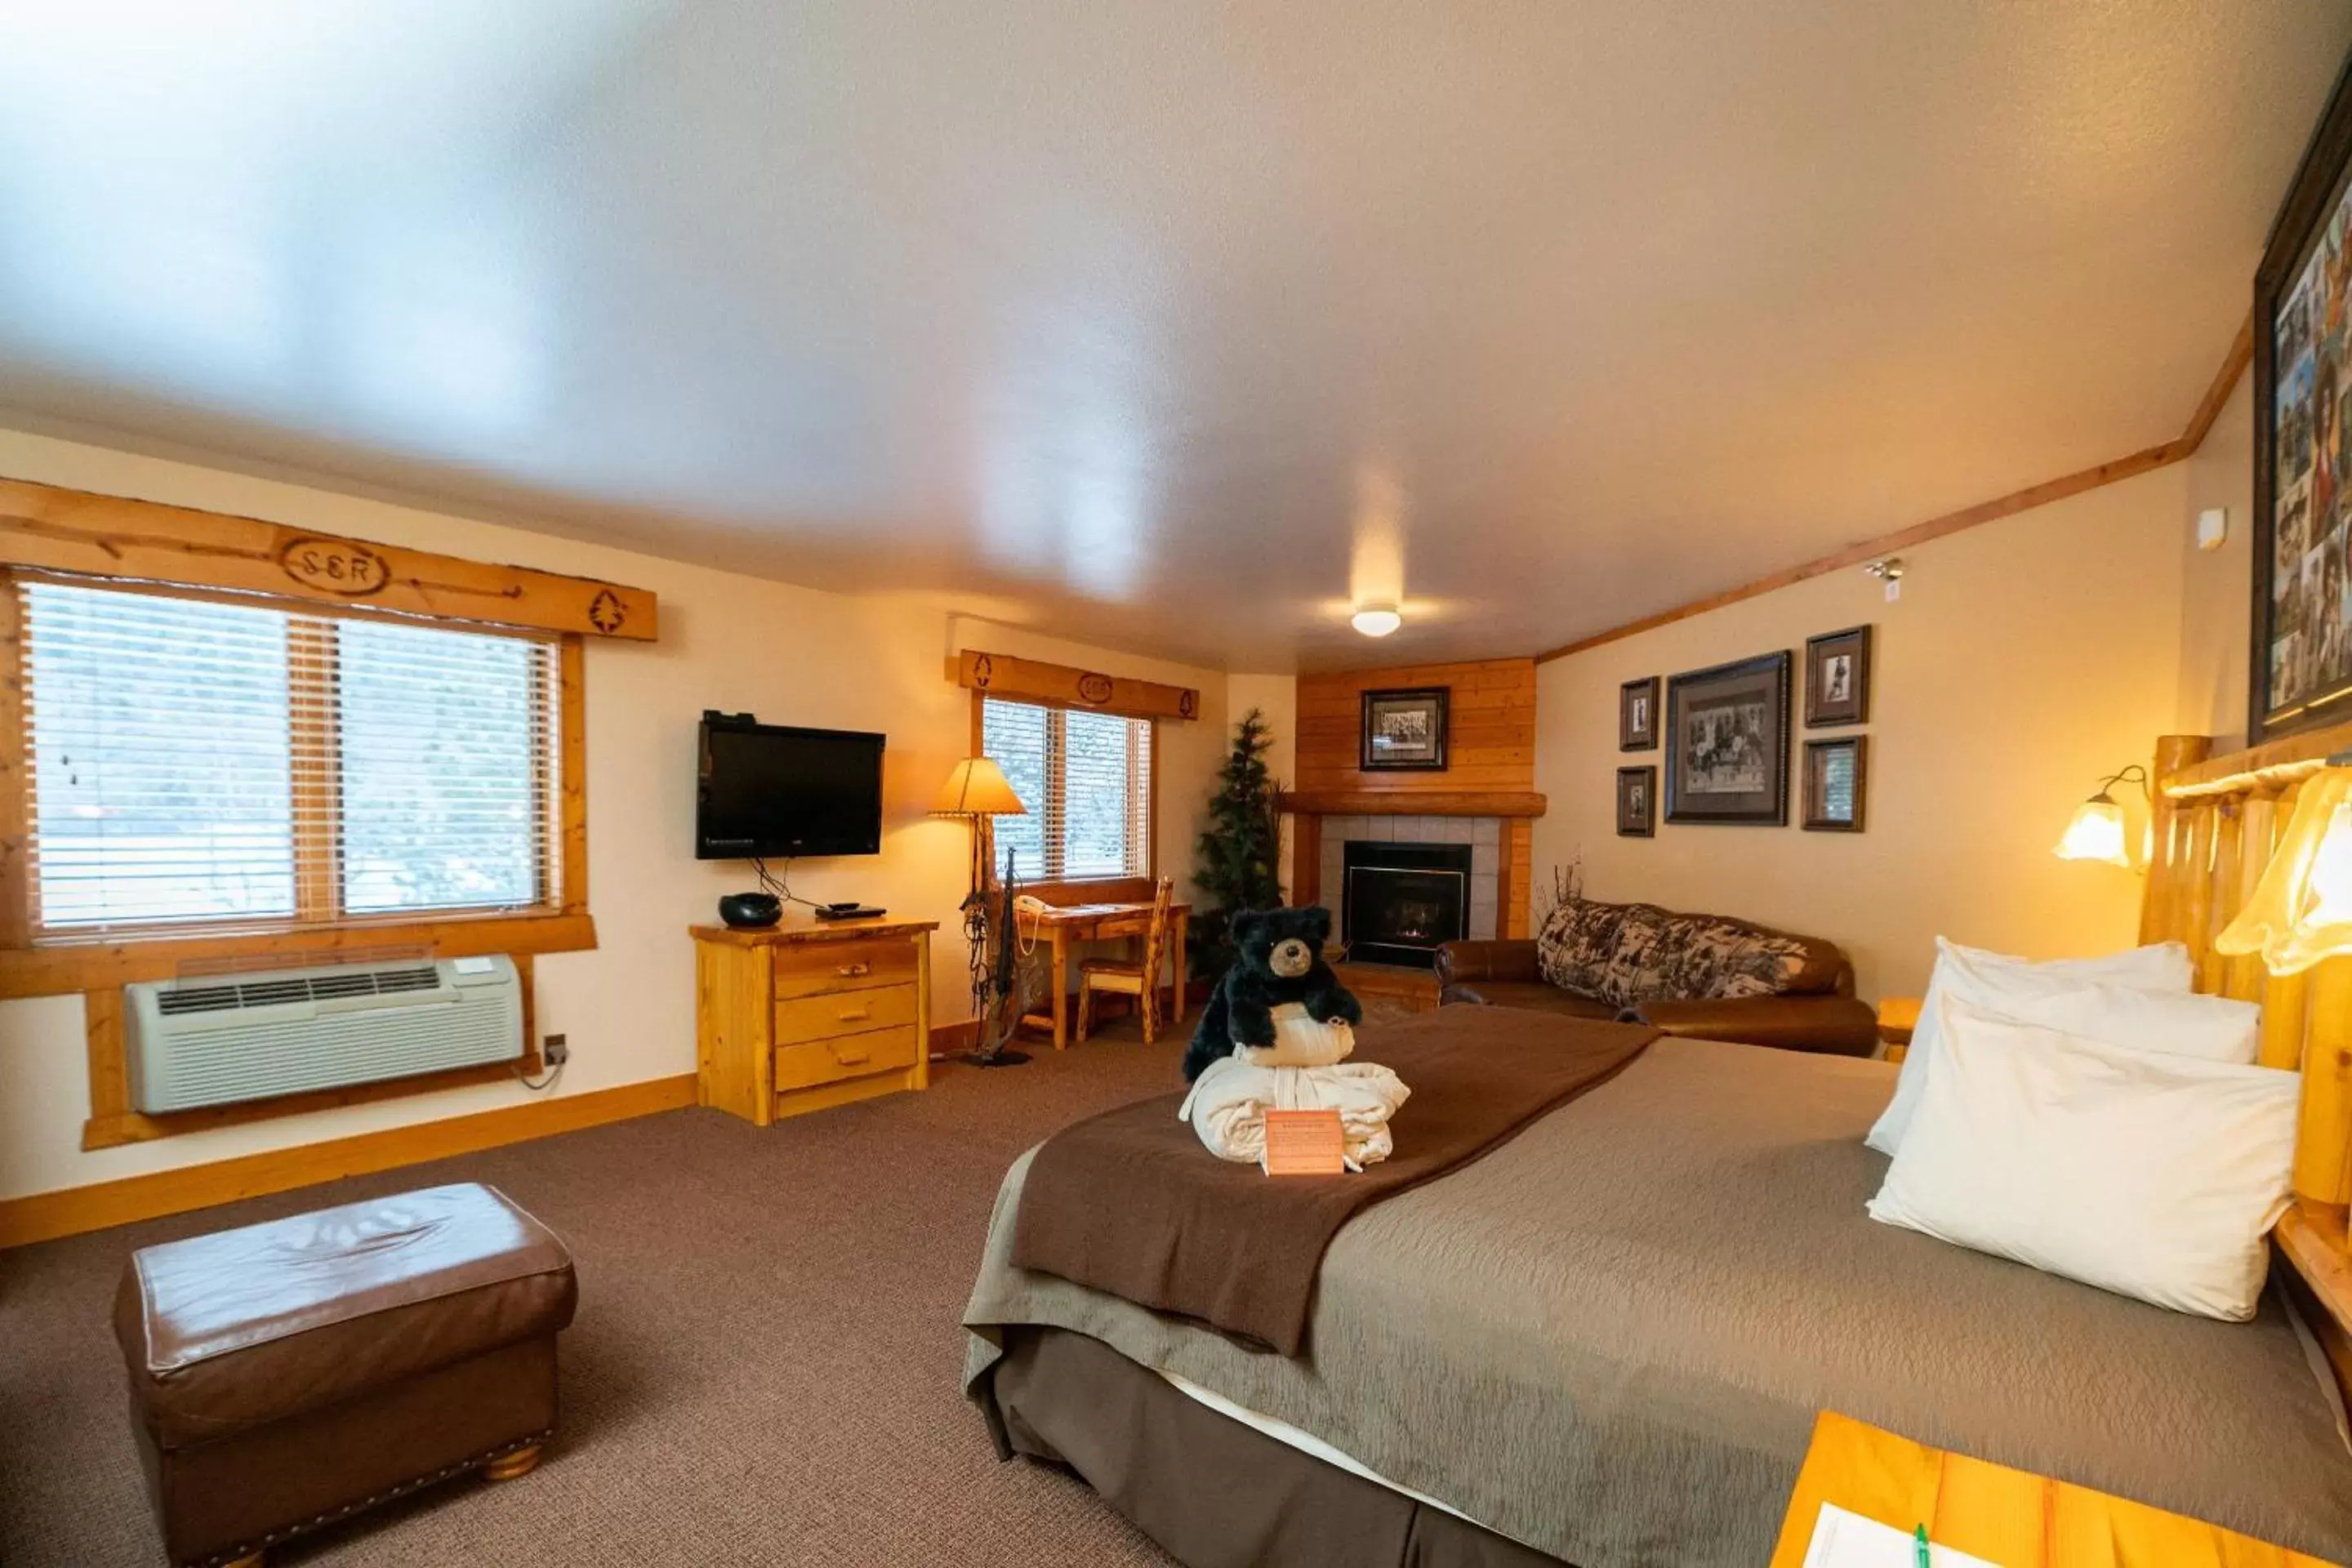 Calamity Jane Suite in Spearfish Canyon Lodge